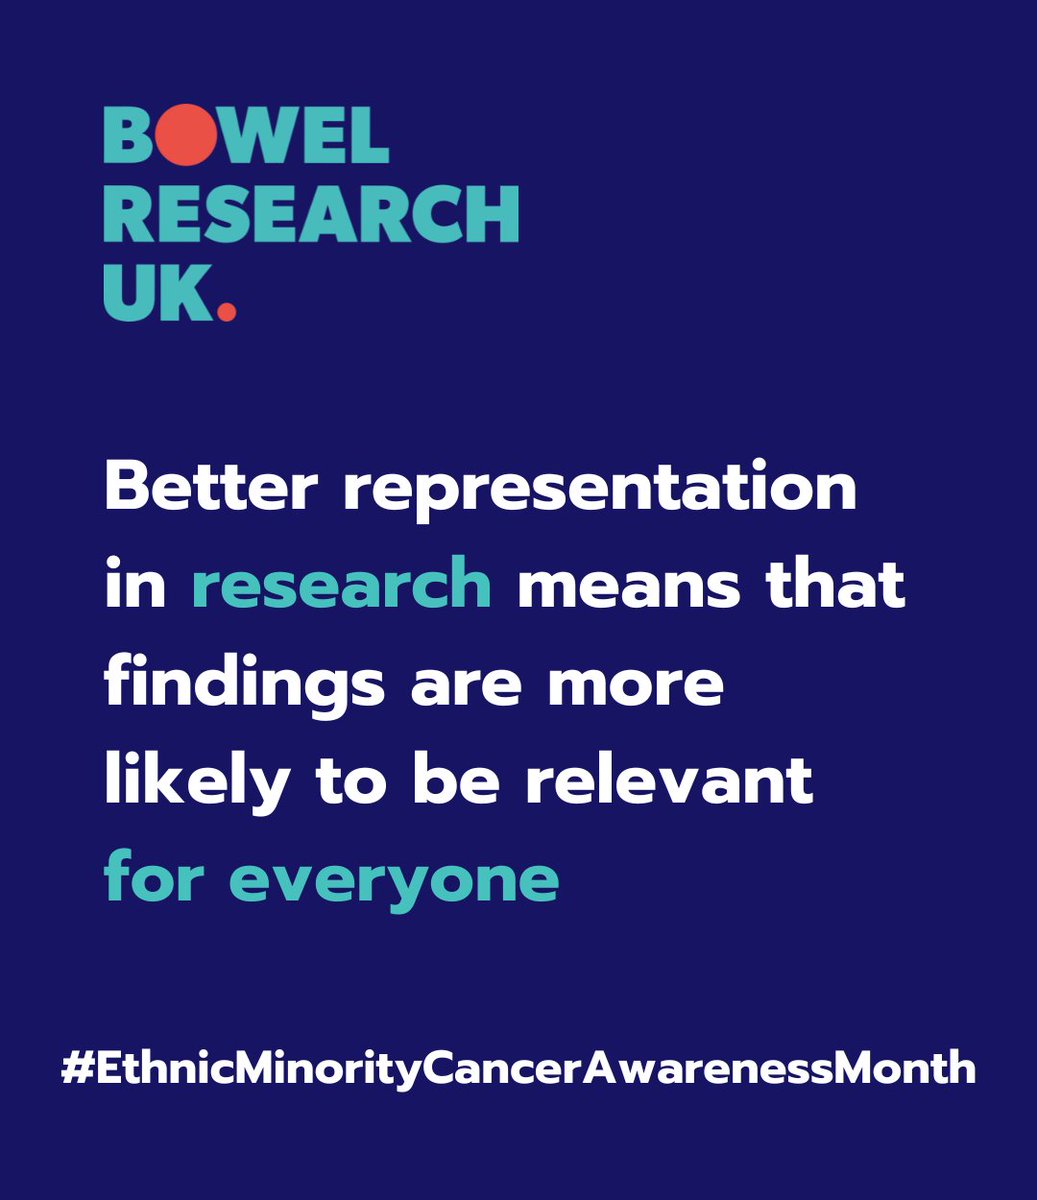 Certain groups of ethnicity are more susceptible to specific diseases. Active participation advances our understanding of bowel diseases and aids in developing inclusive and effective healthcare solutions. Get involved: bowelresearchuk.org/our-research/p… #EthnicMinorityCancerAwarenessMonth